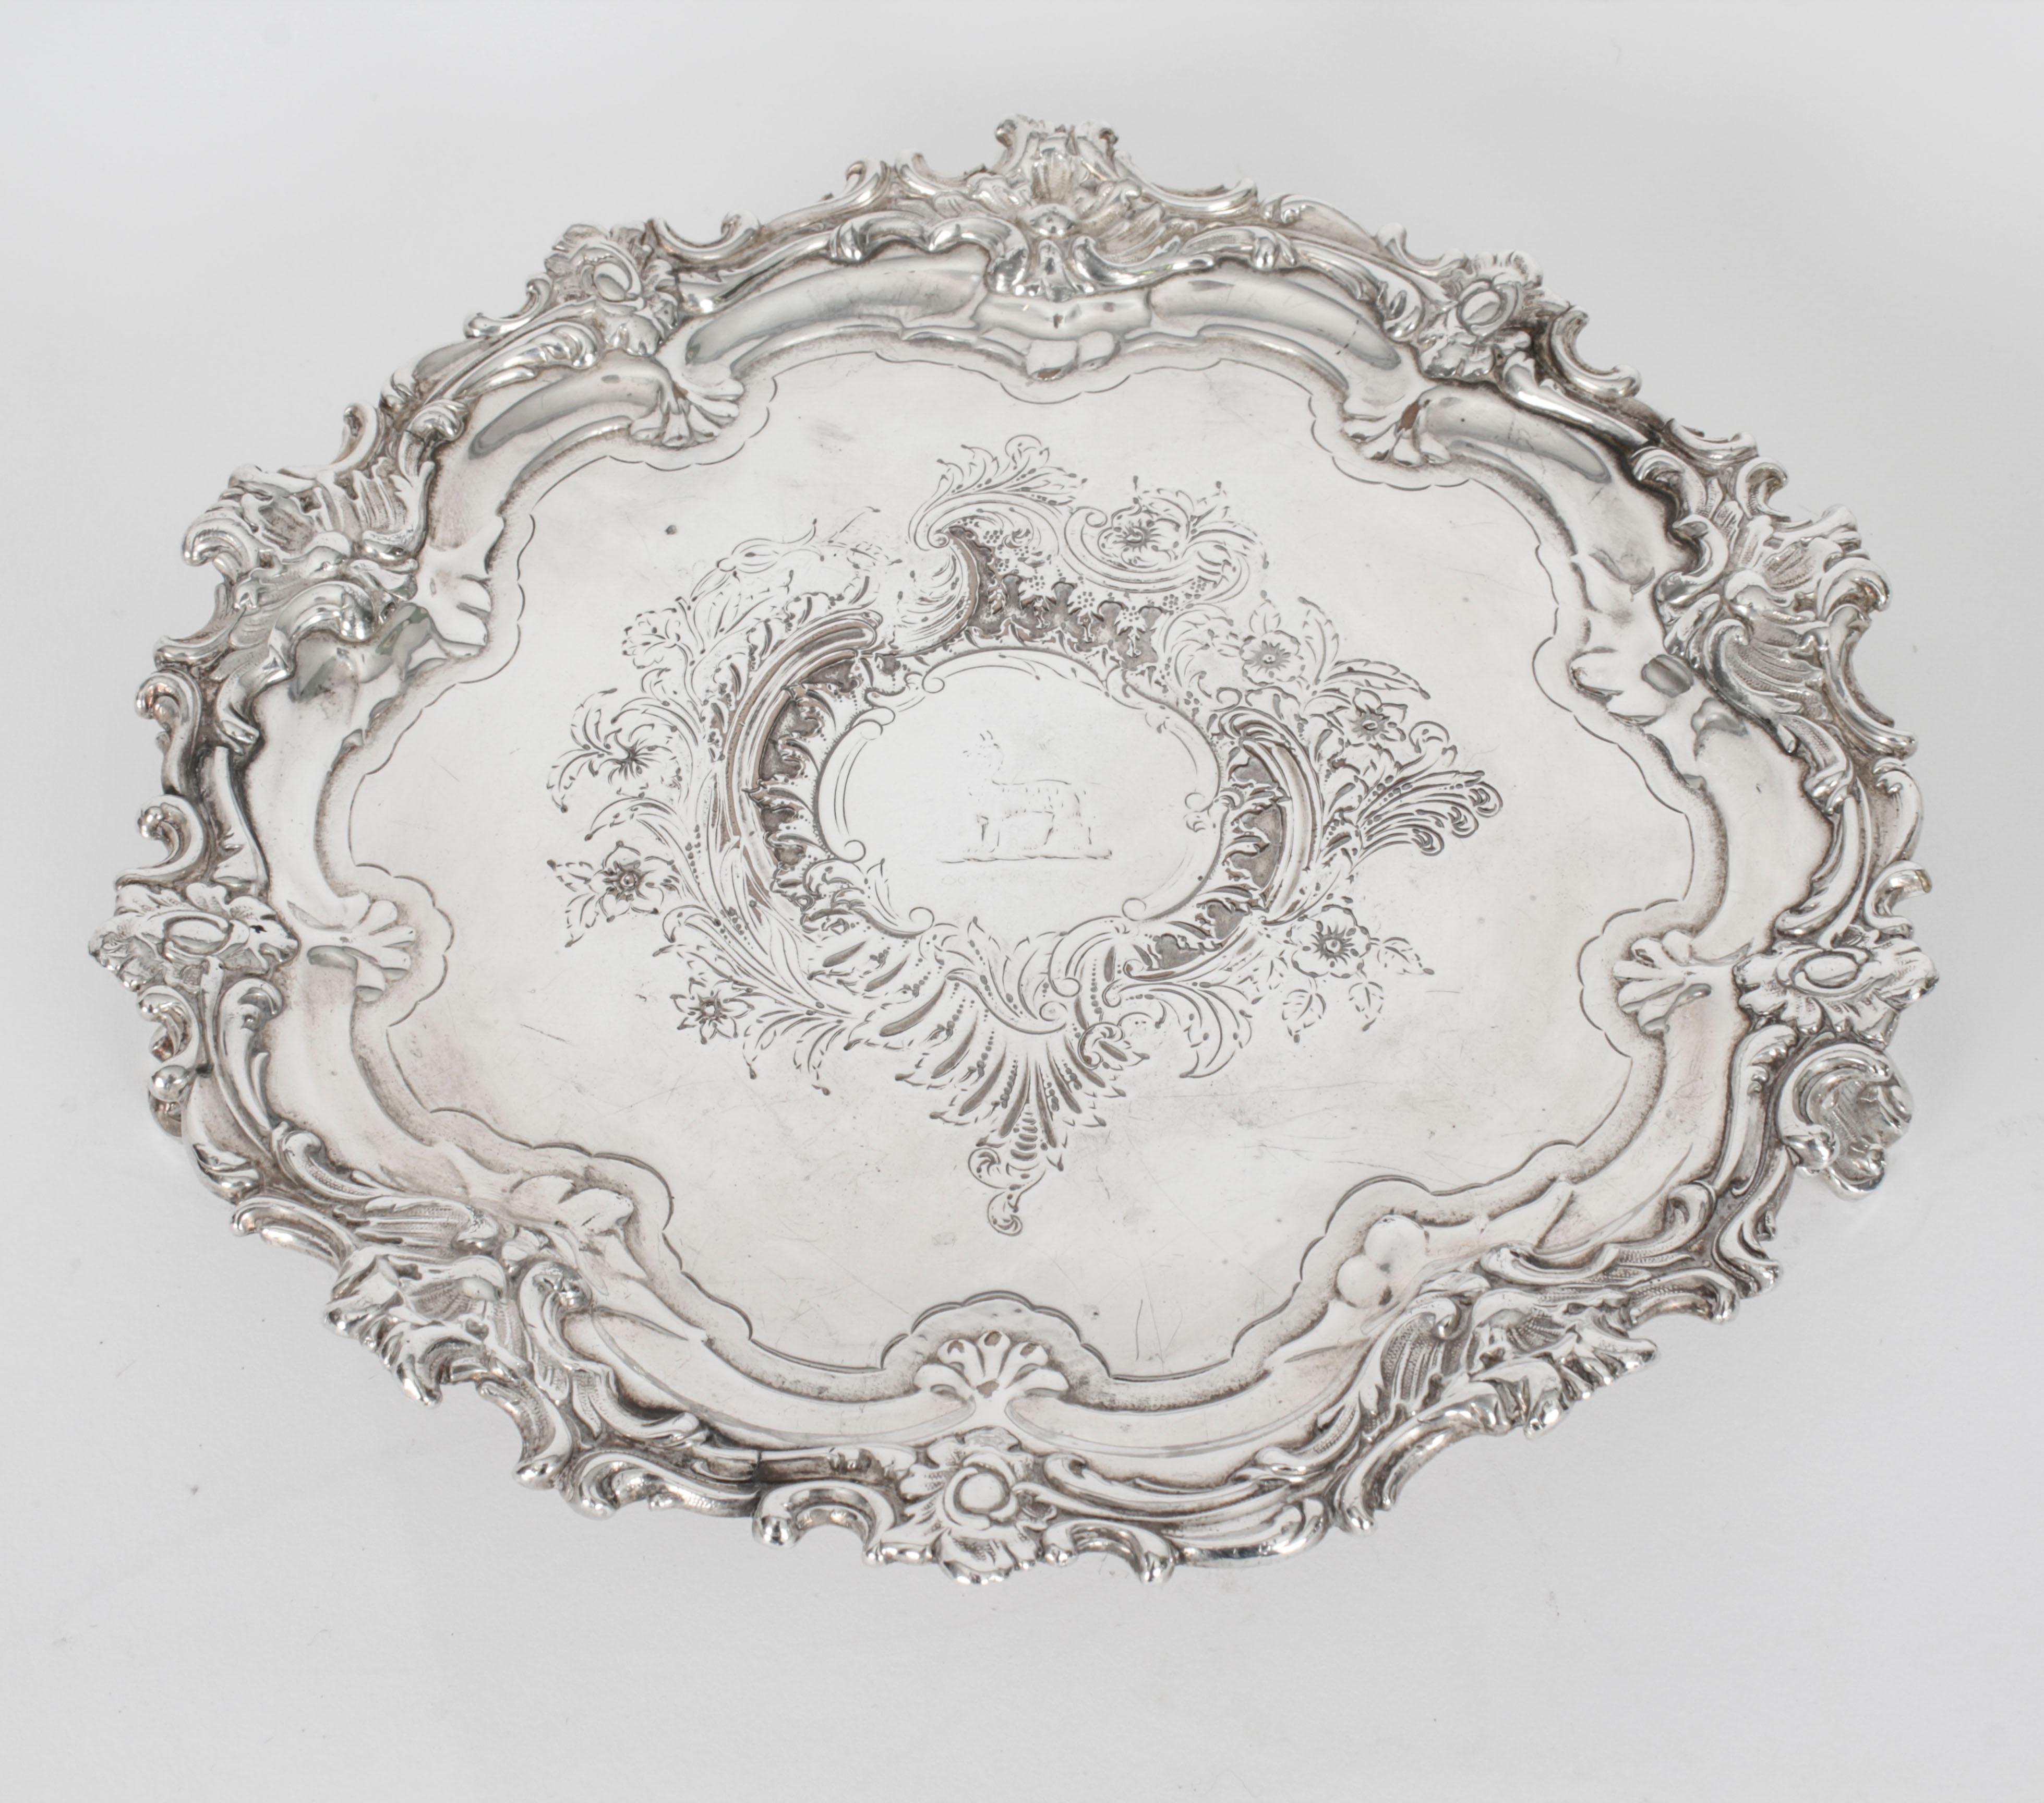 English Antique Old Shefield Silver Plated Salver by Smith, Tate, Nicholson 19th Century For Sale